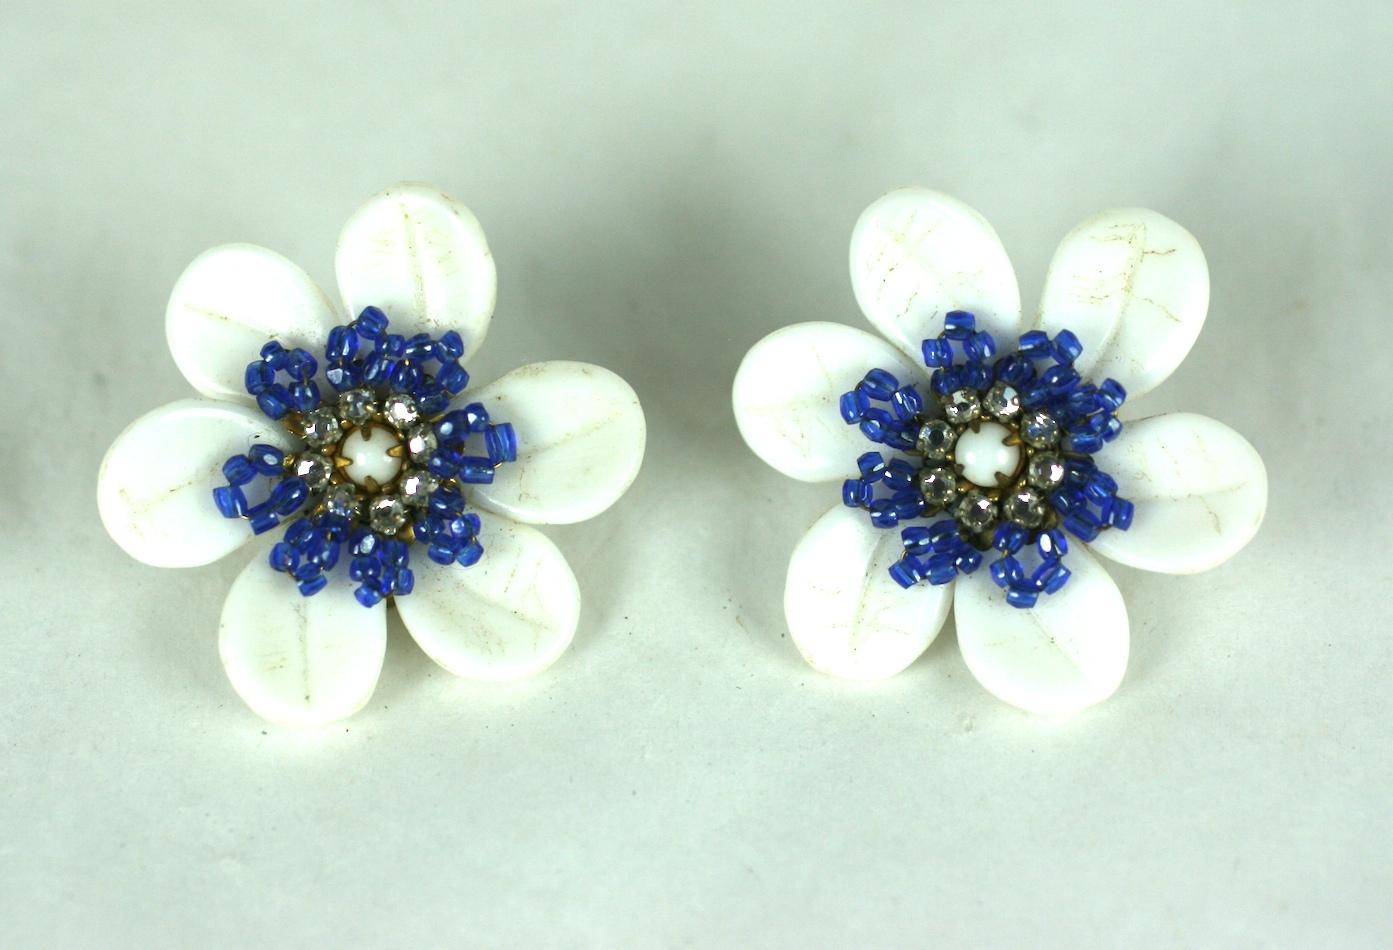 Charming Miriam Haskell Milk Glass Flower earrings with hand sewn seed bead detailing. Milk glass petals form the flower with a center of purpley blue seed beads with a crystal diamante center. Clip back fittings.
1950's USA. Excellent condition.